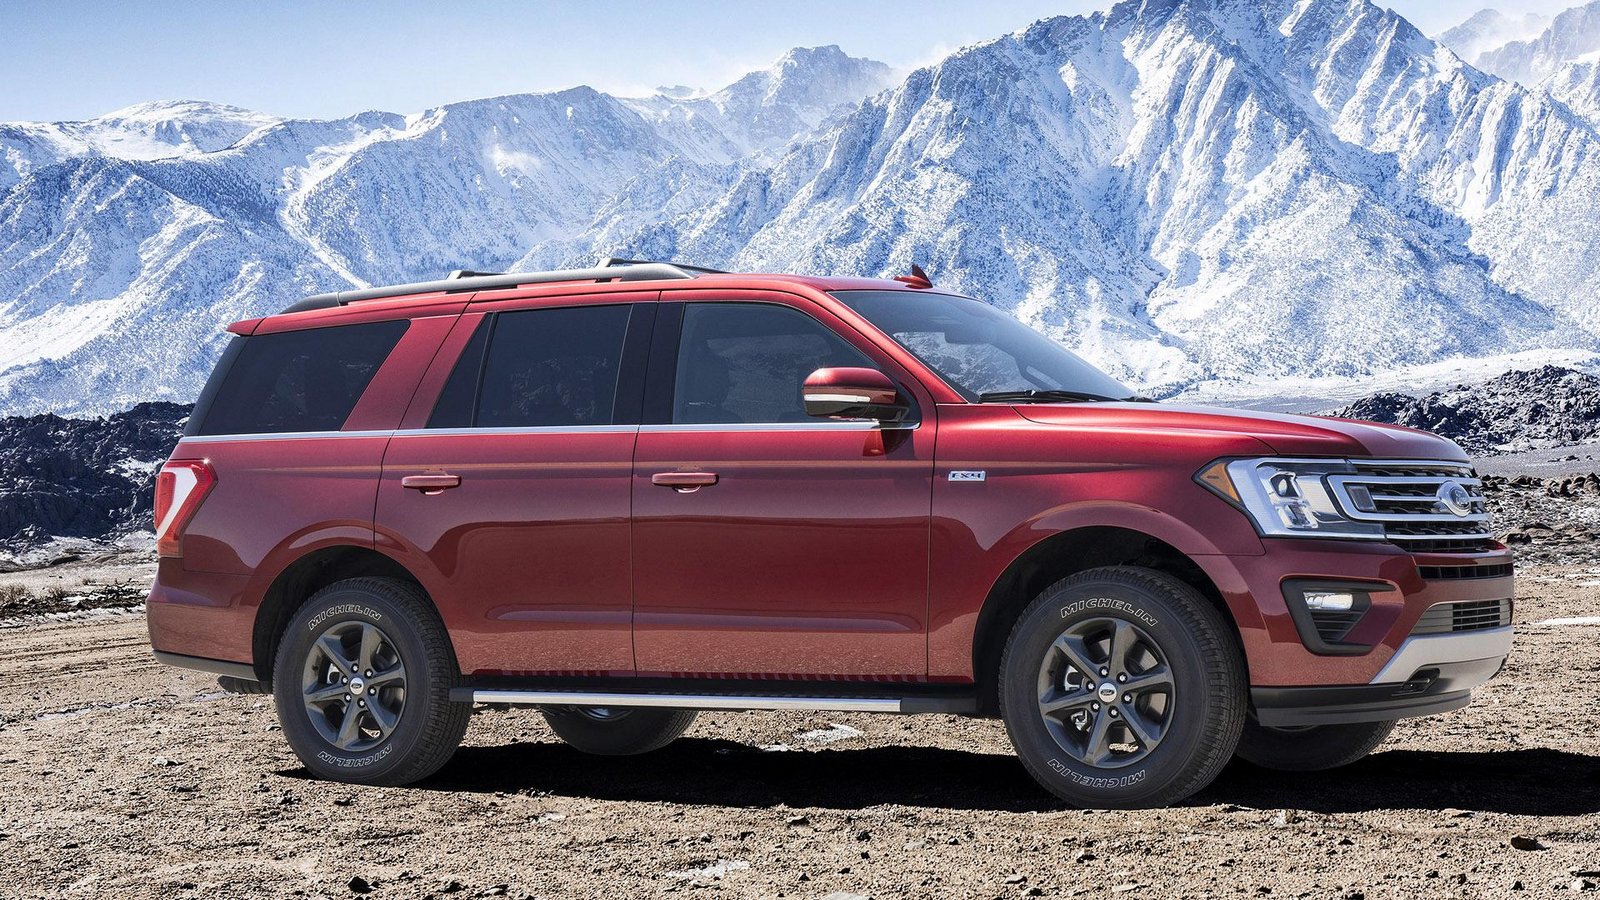 2018 Ford Expedition FX4 Bows With An Assortment Of Off-Road ...